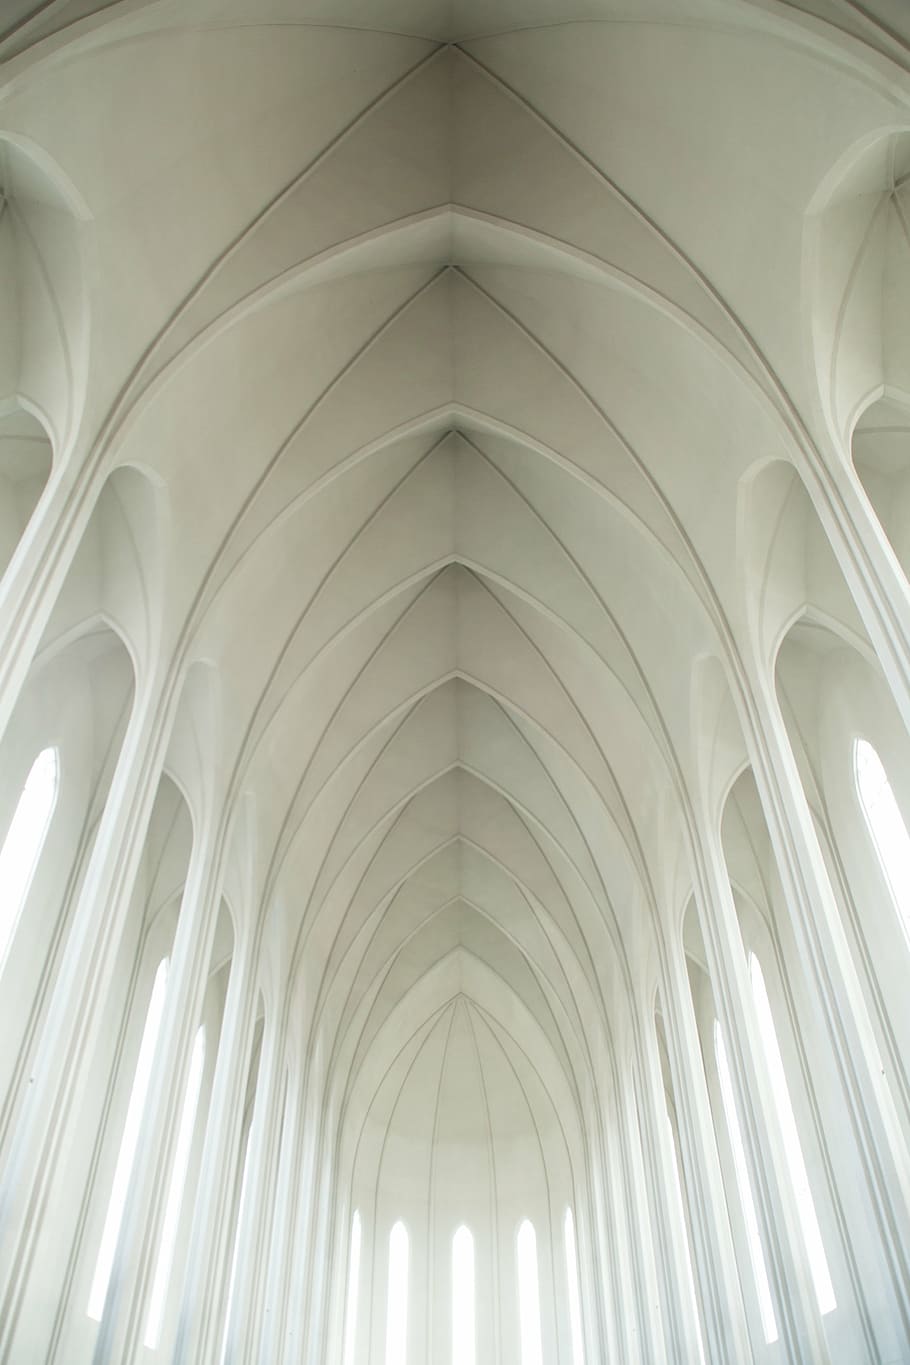 low-angle photography, triangular, building, interior, low, angle, white, cathedral, ceiling, church